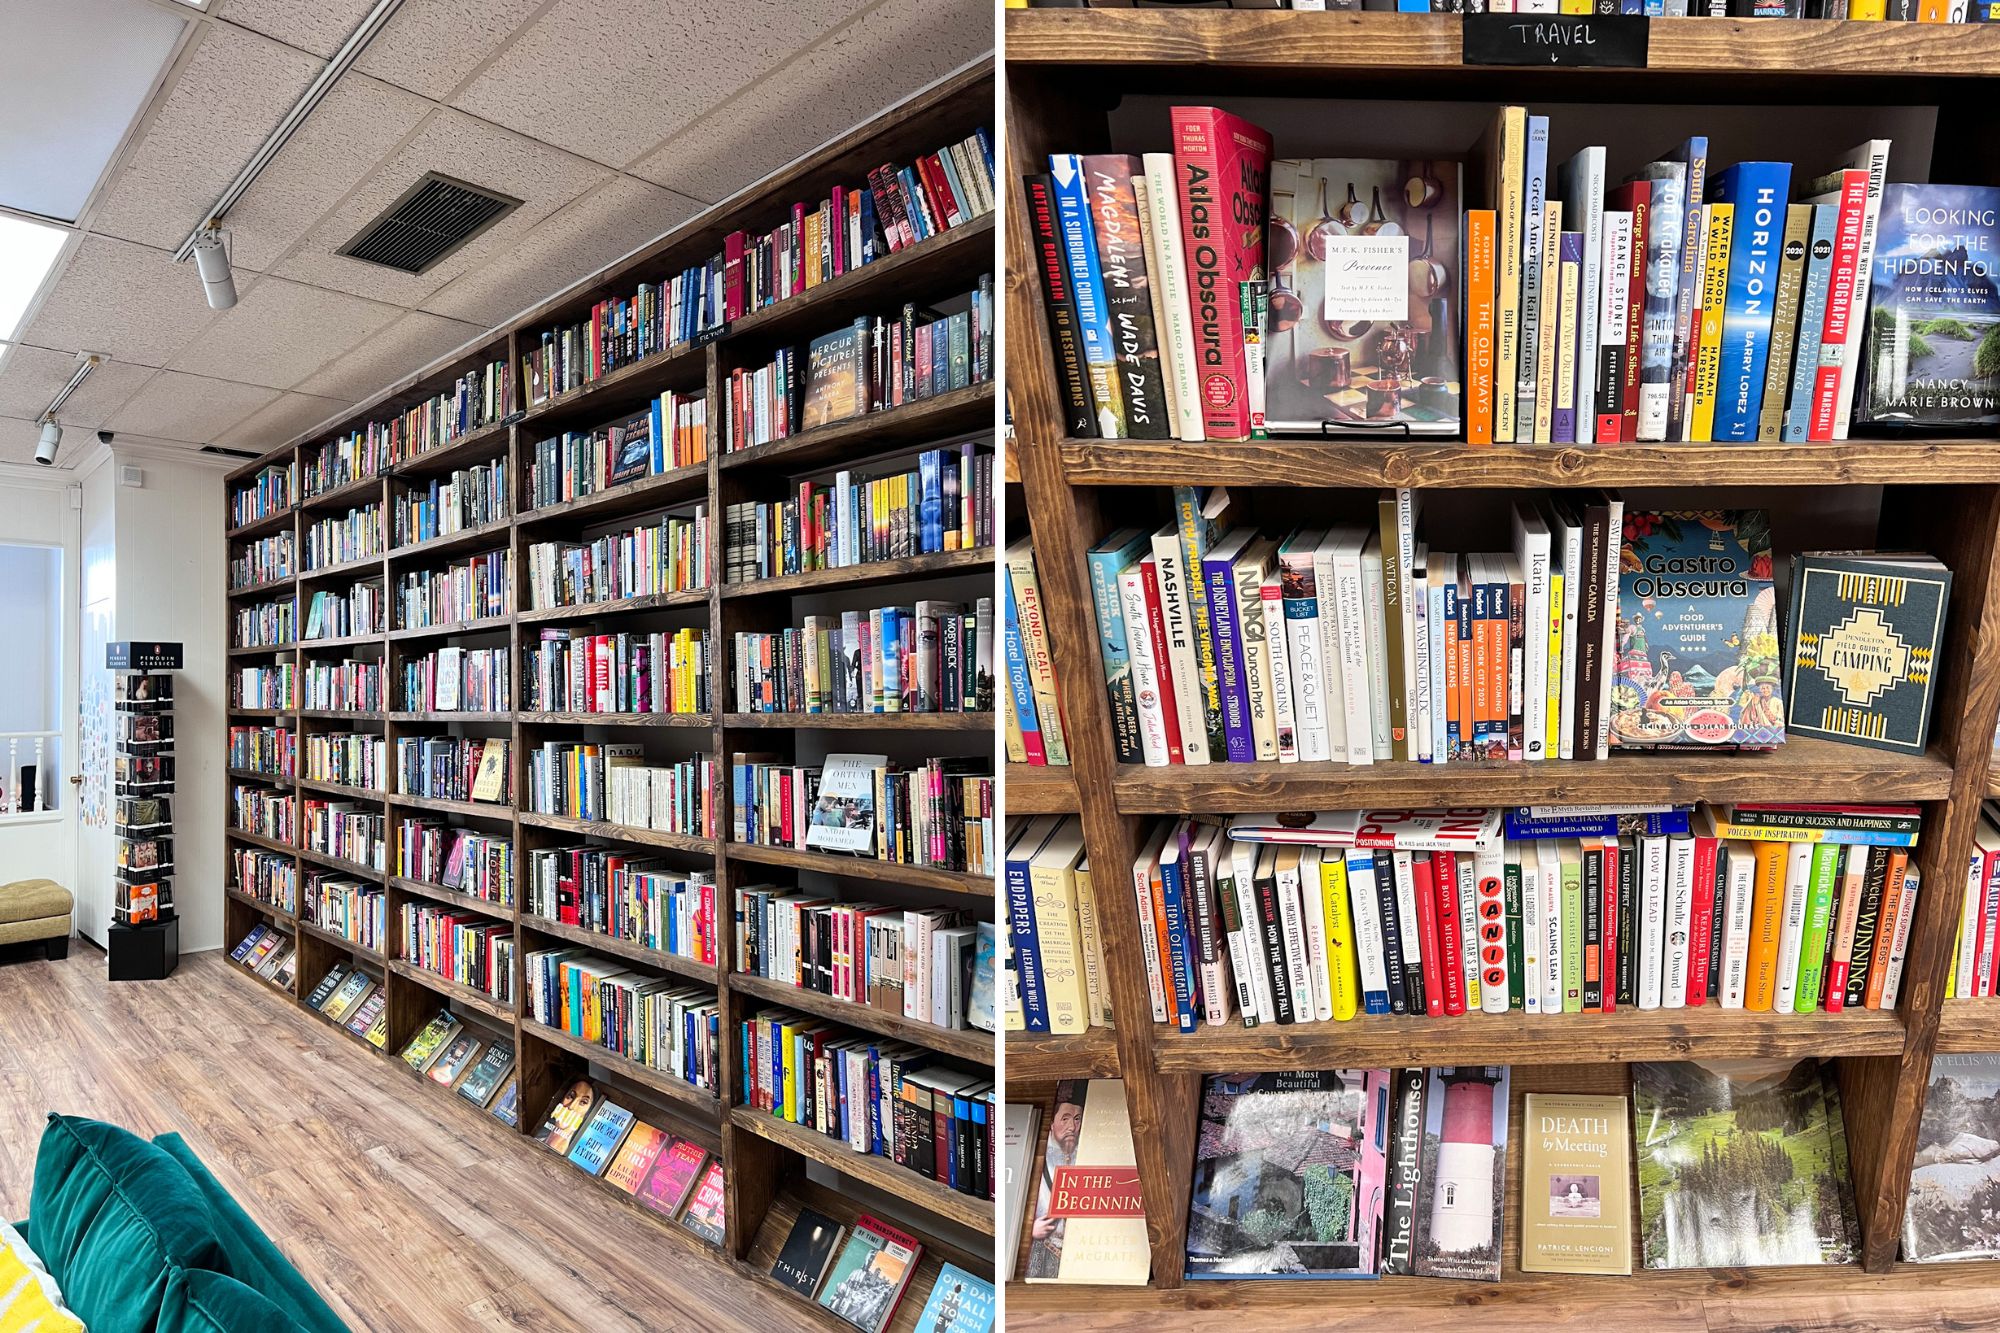 Rows and rows of books on the shelf at Goldberry Books